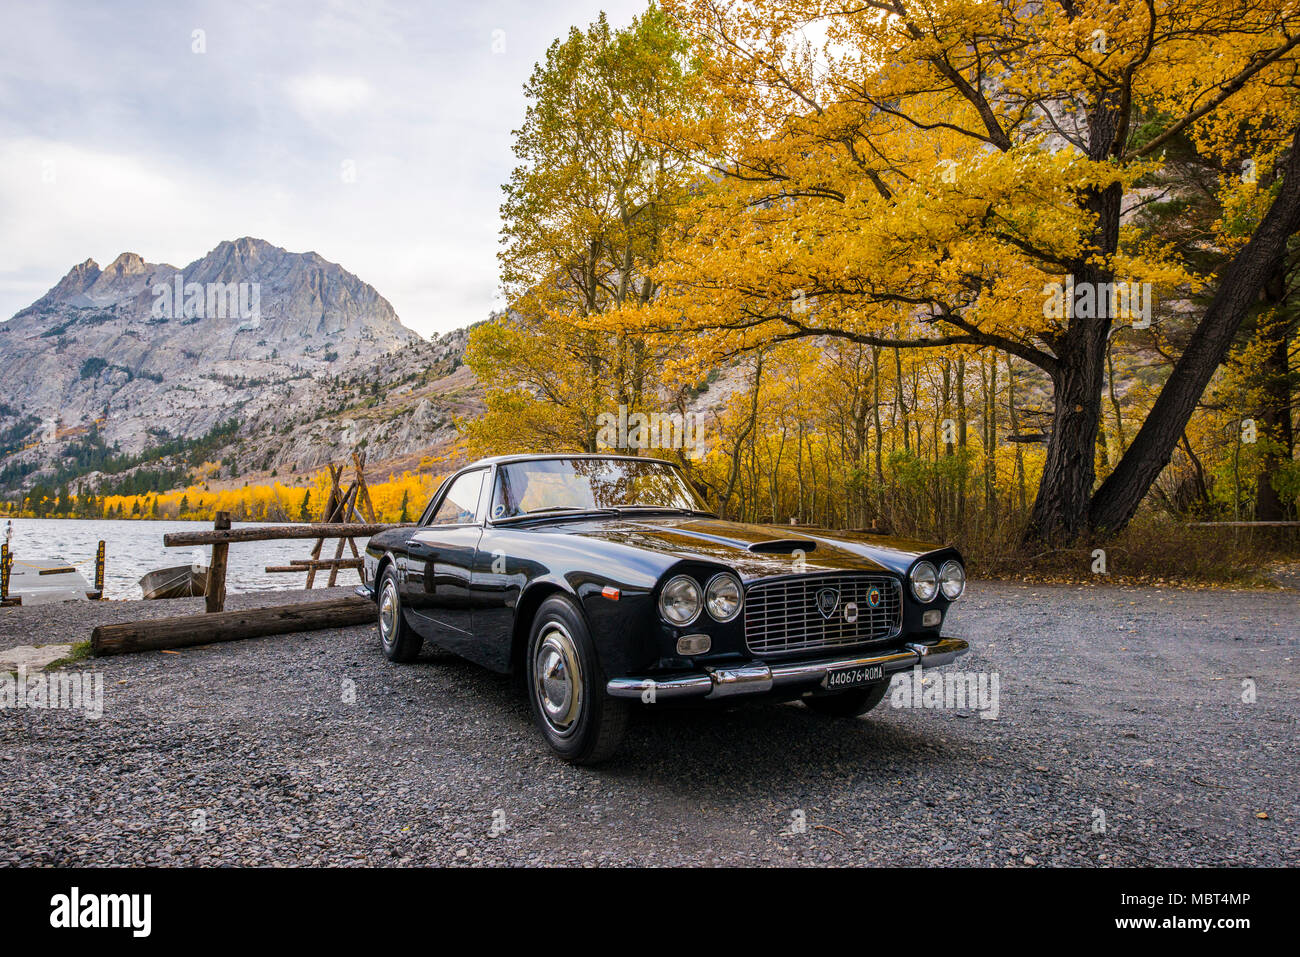 A 1961 Lancia Flaminia car parked in front of Silver Lake along June Lake Loop surrounded by fall color in June Lake, California. Stock Photo